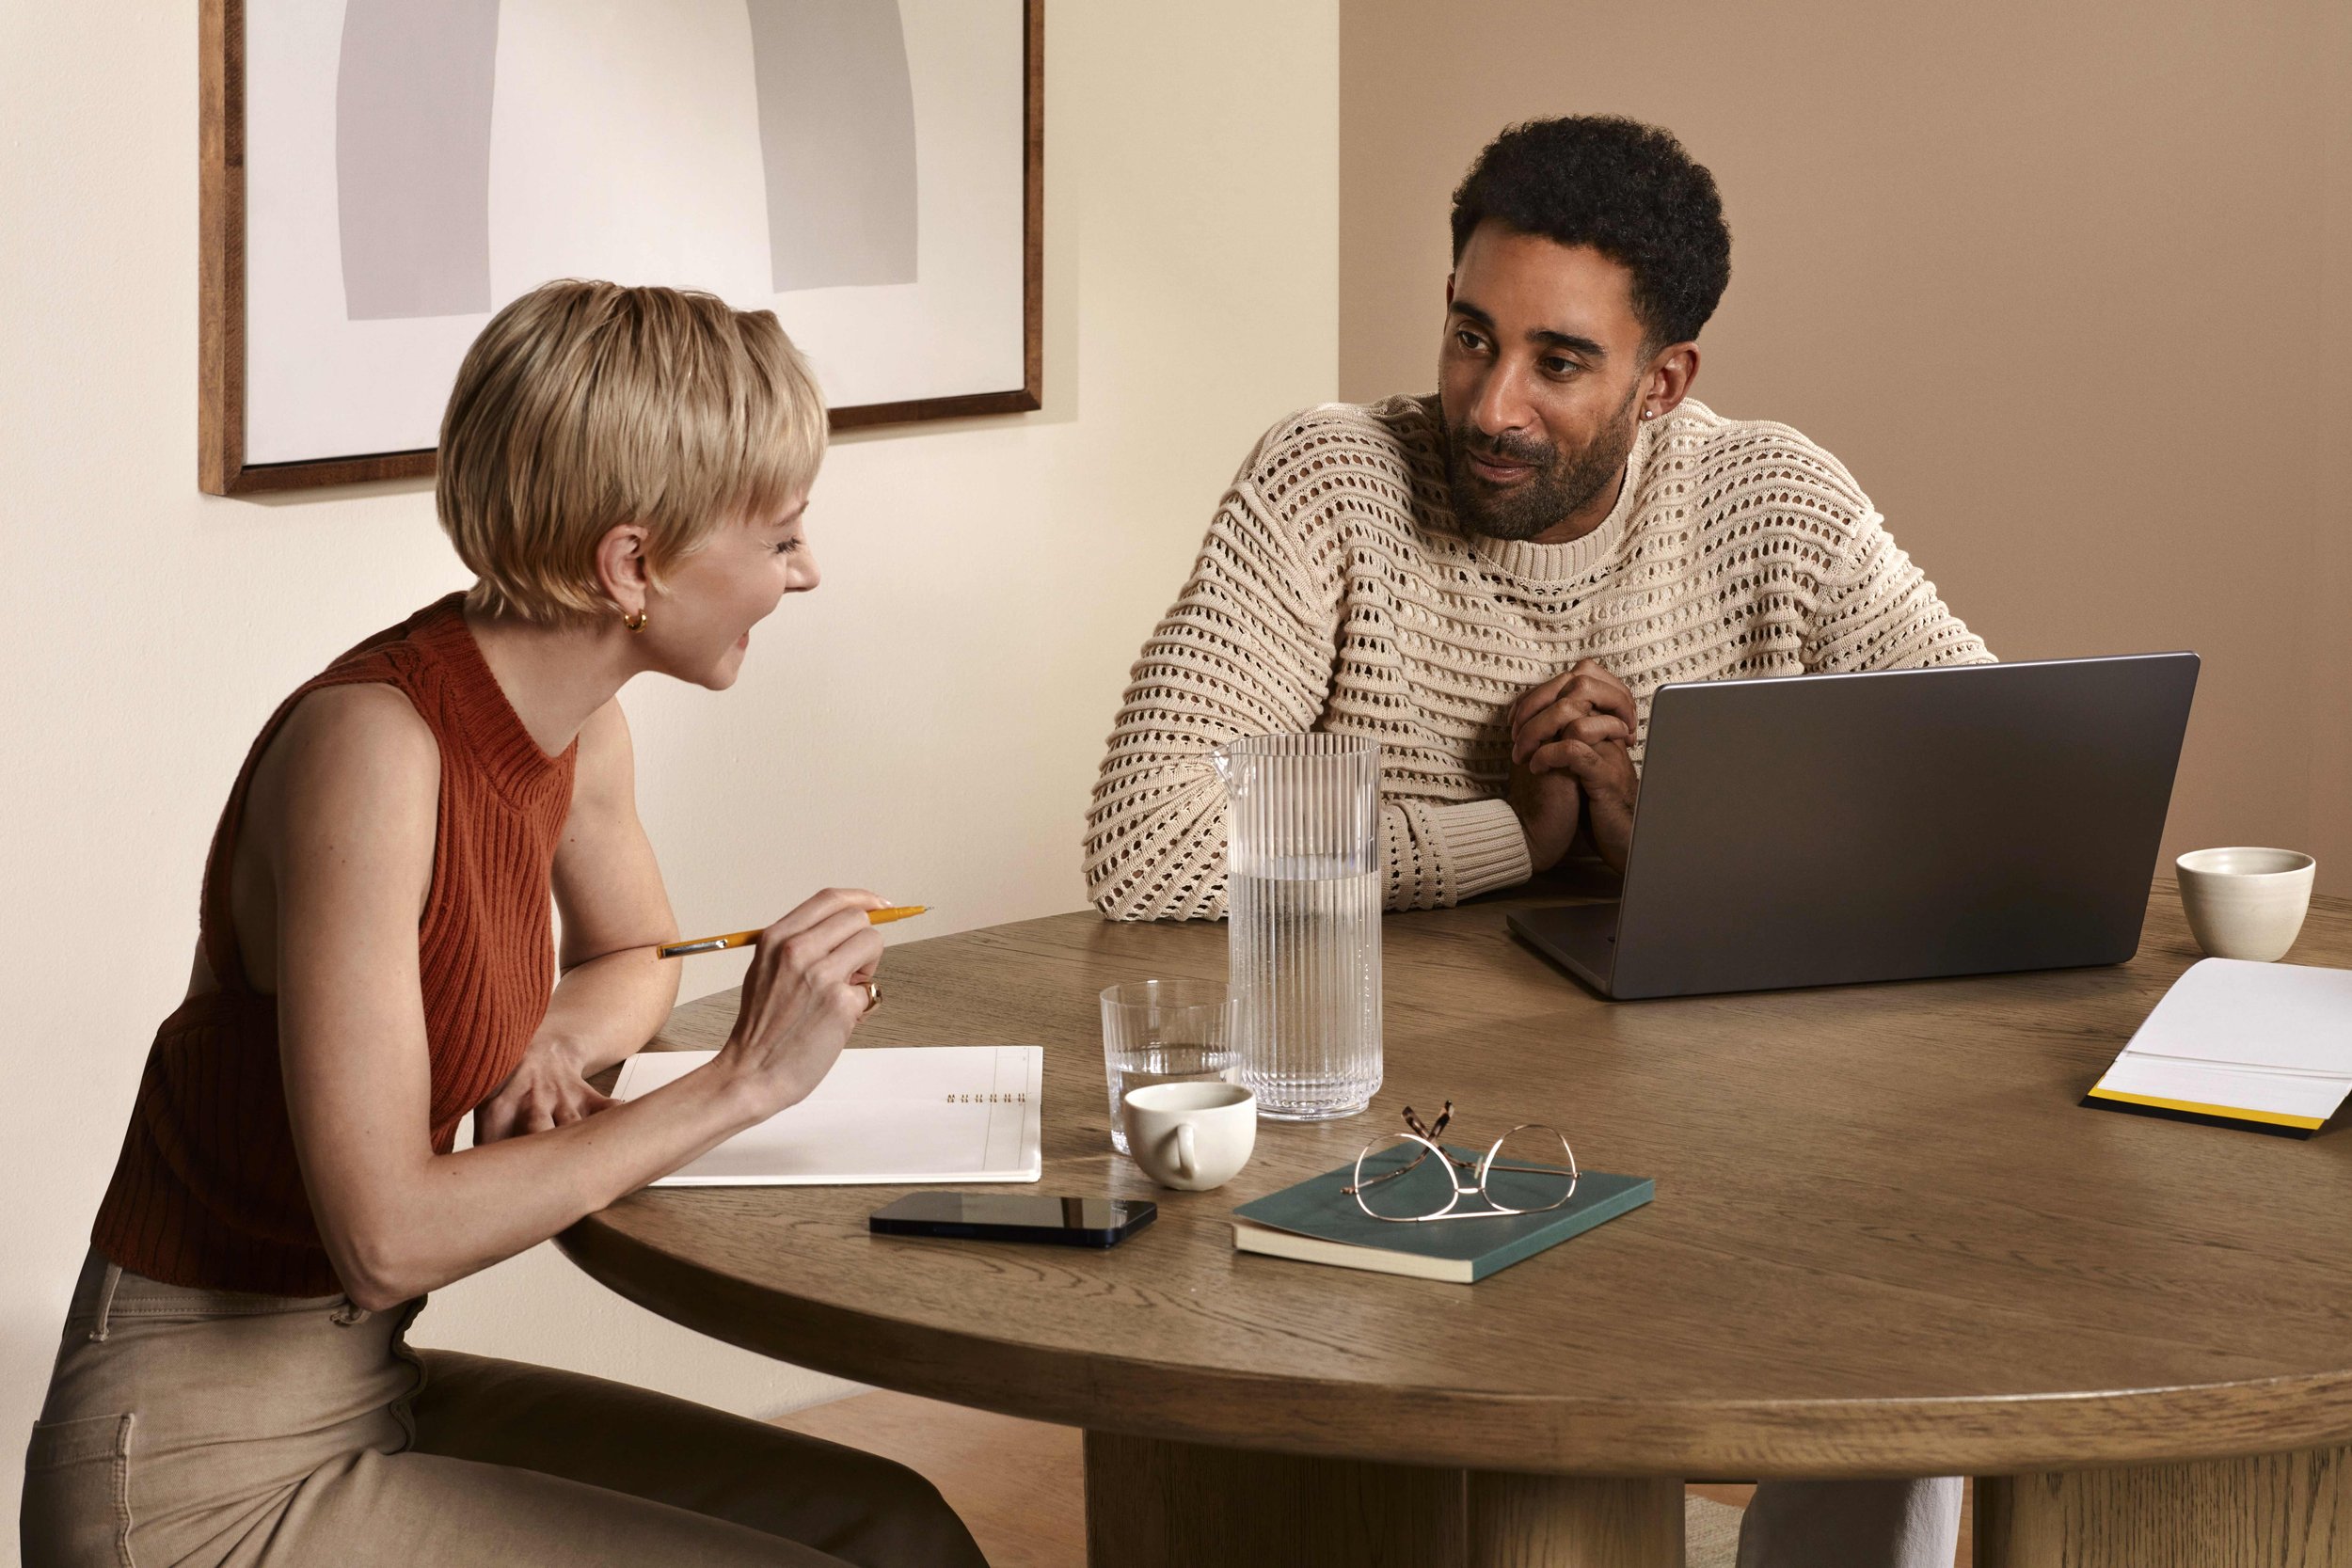 Man with laptop collaborating with woman holding notebook